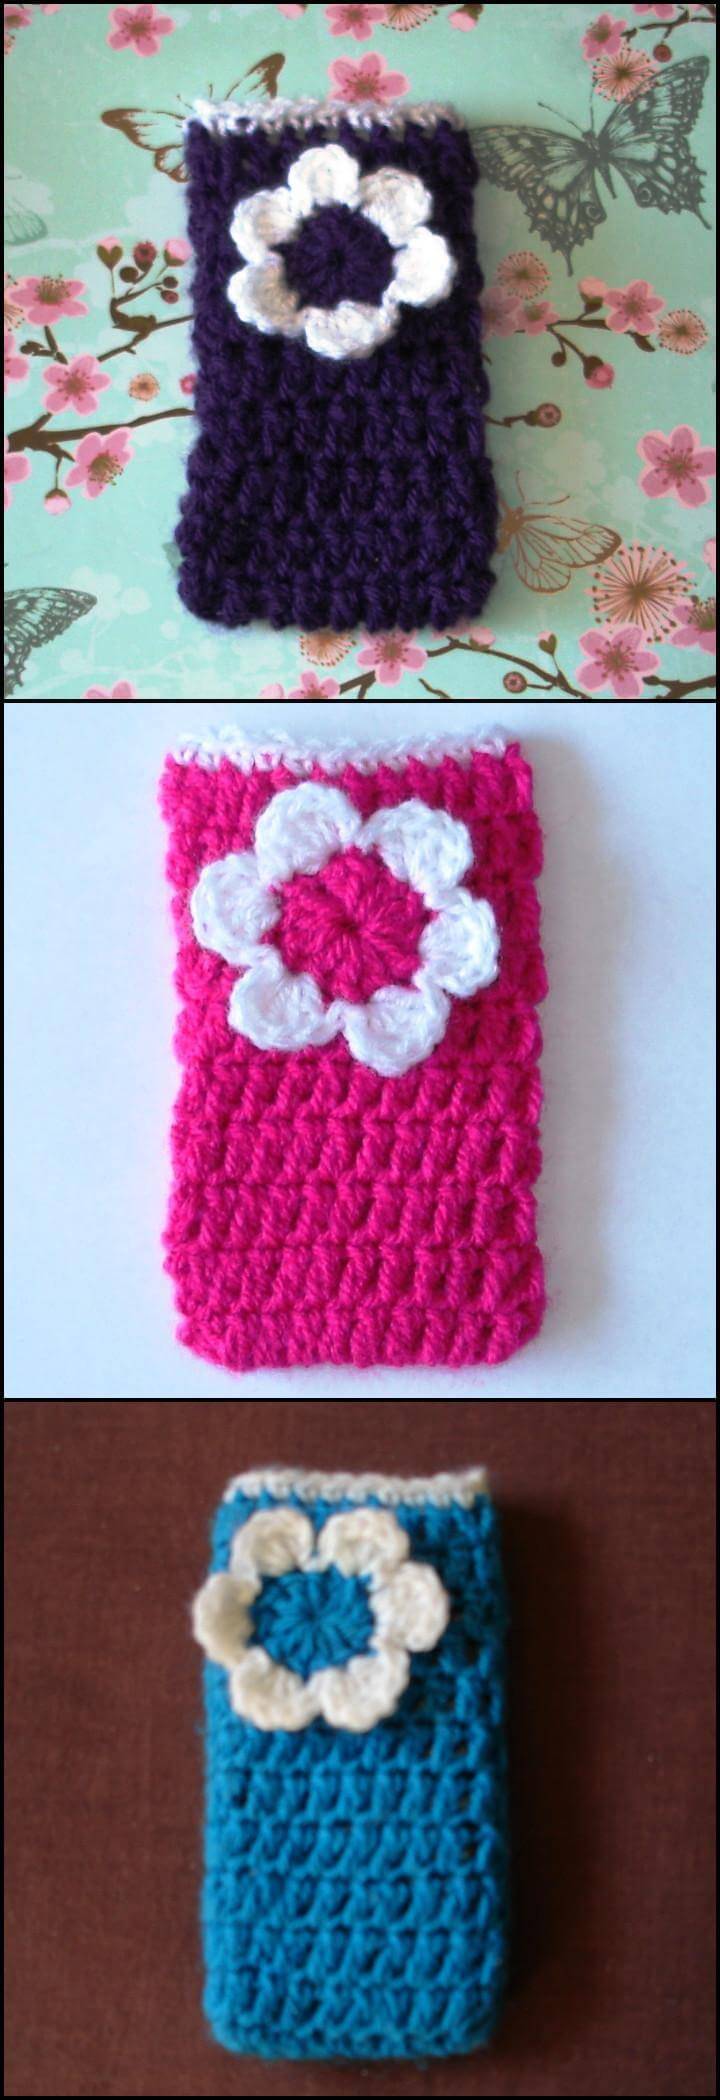 crochet cell phone cozy with flower on the top